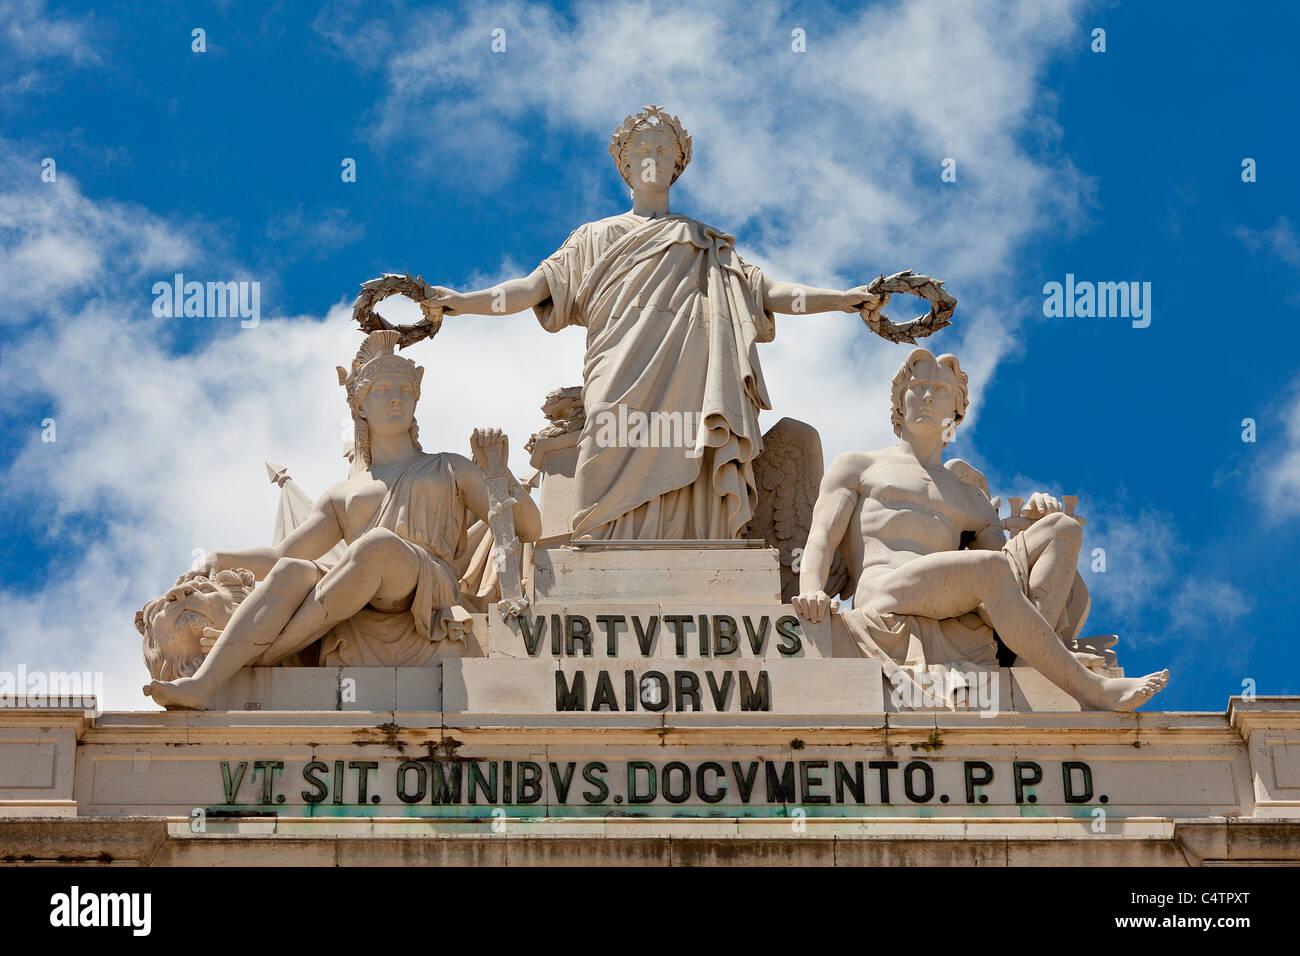 Europe, Portugal, Lisbon, Statues of the Glory on The Triumphal Arch Stock Photo